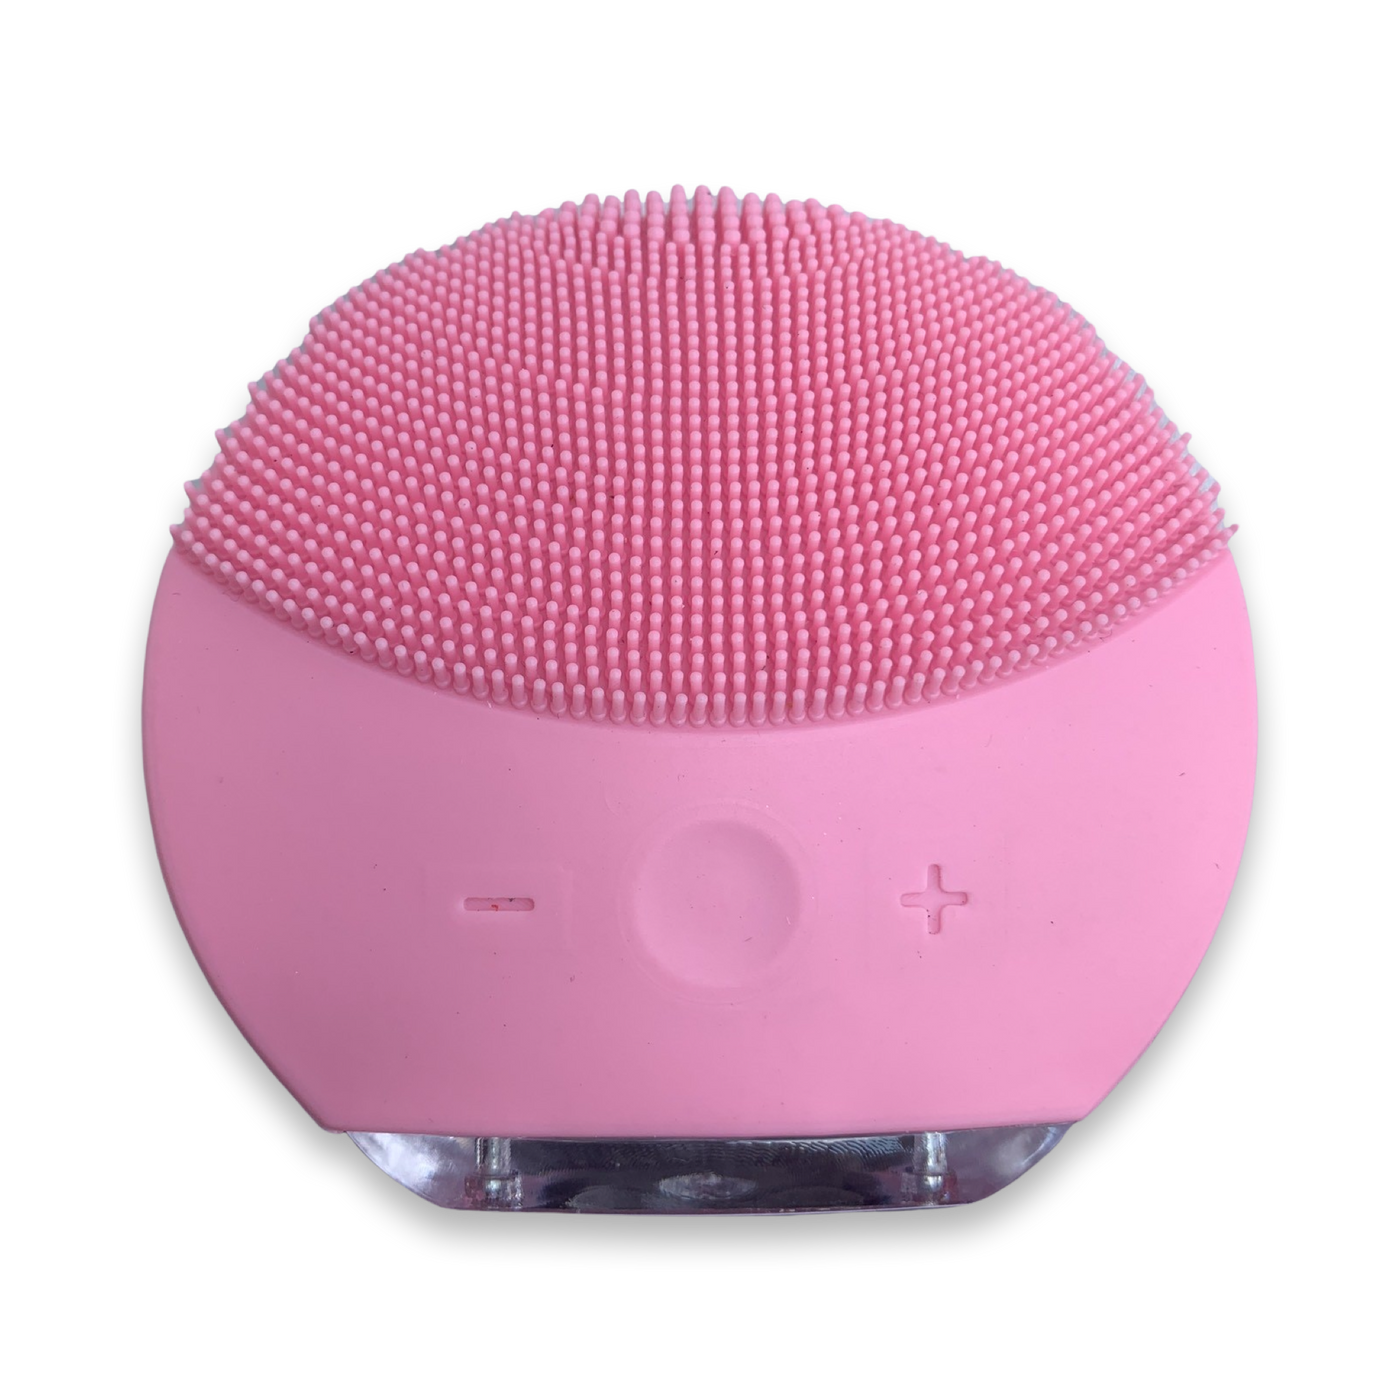 Vibration Face Massager with USB Rechargeable - Astroida